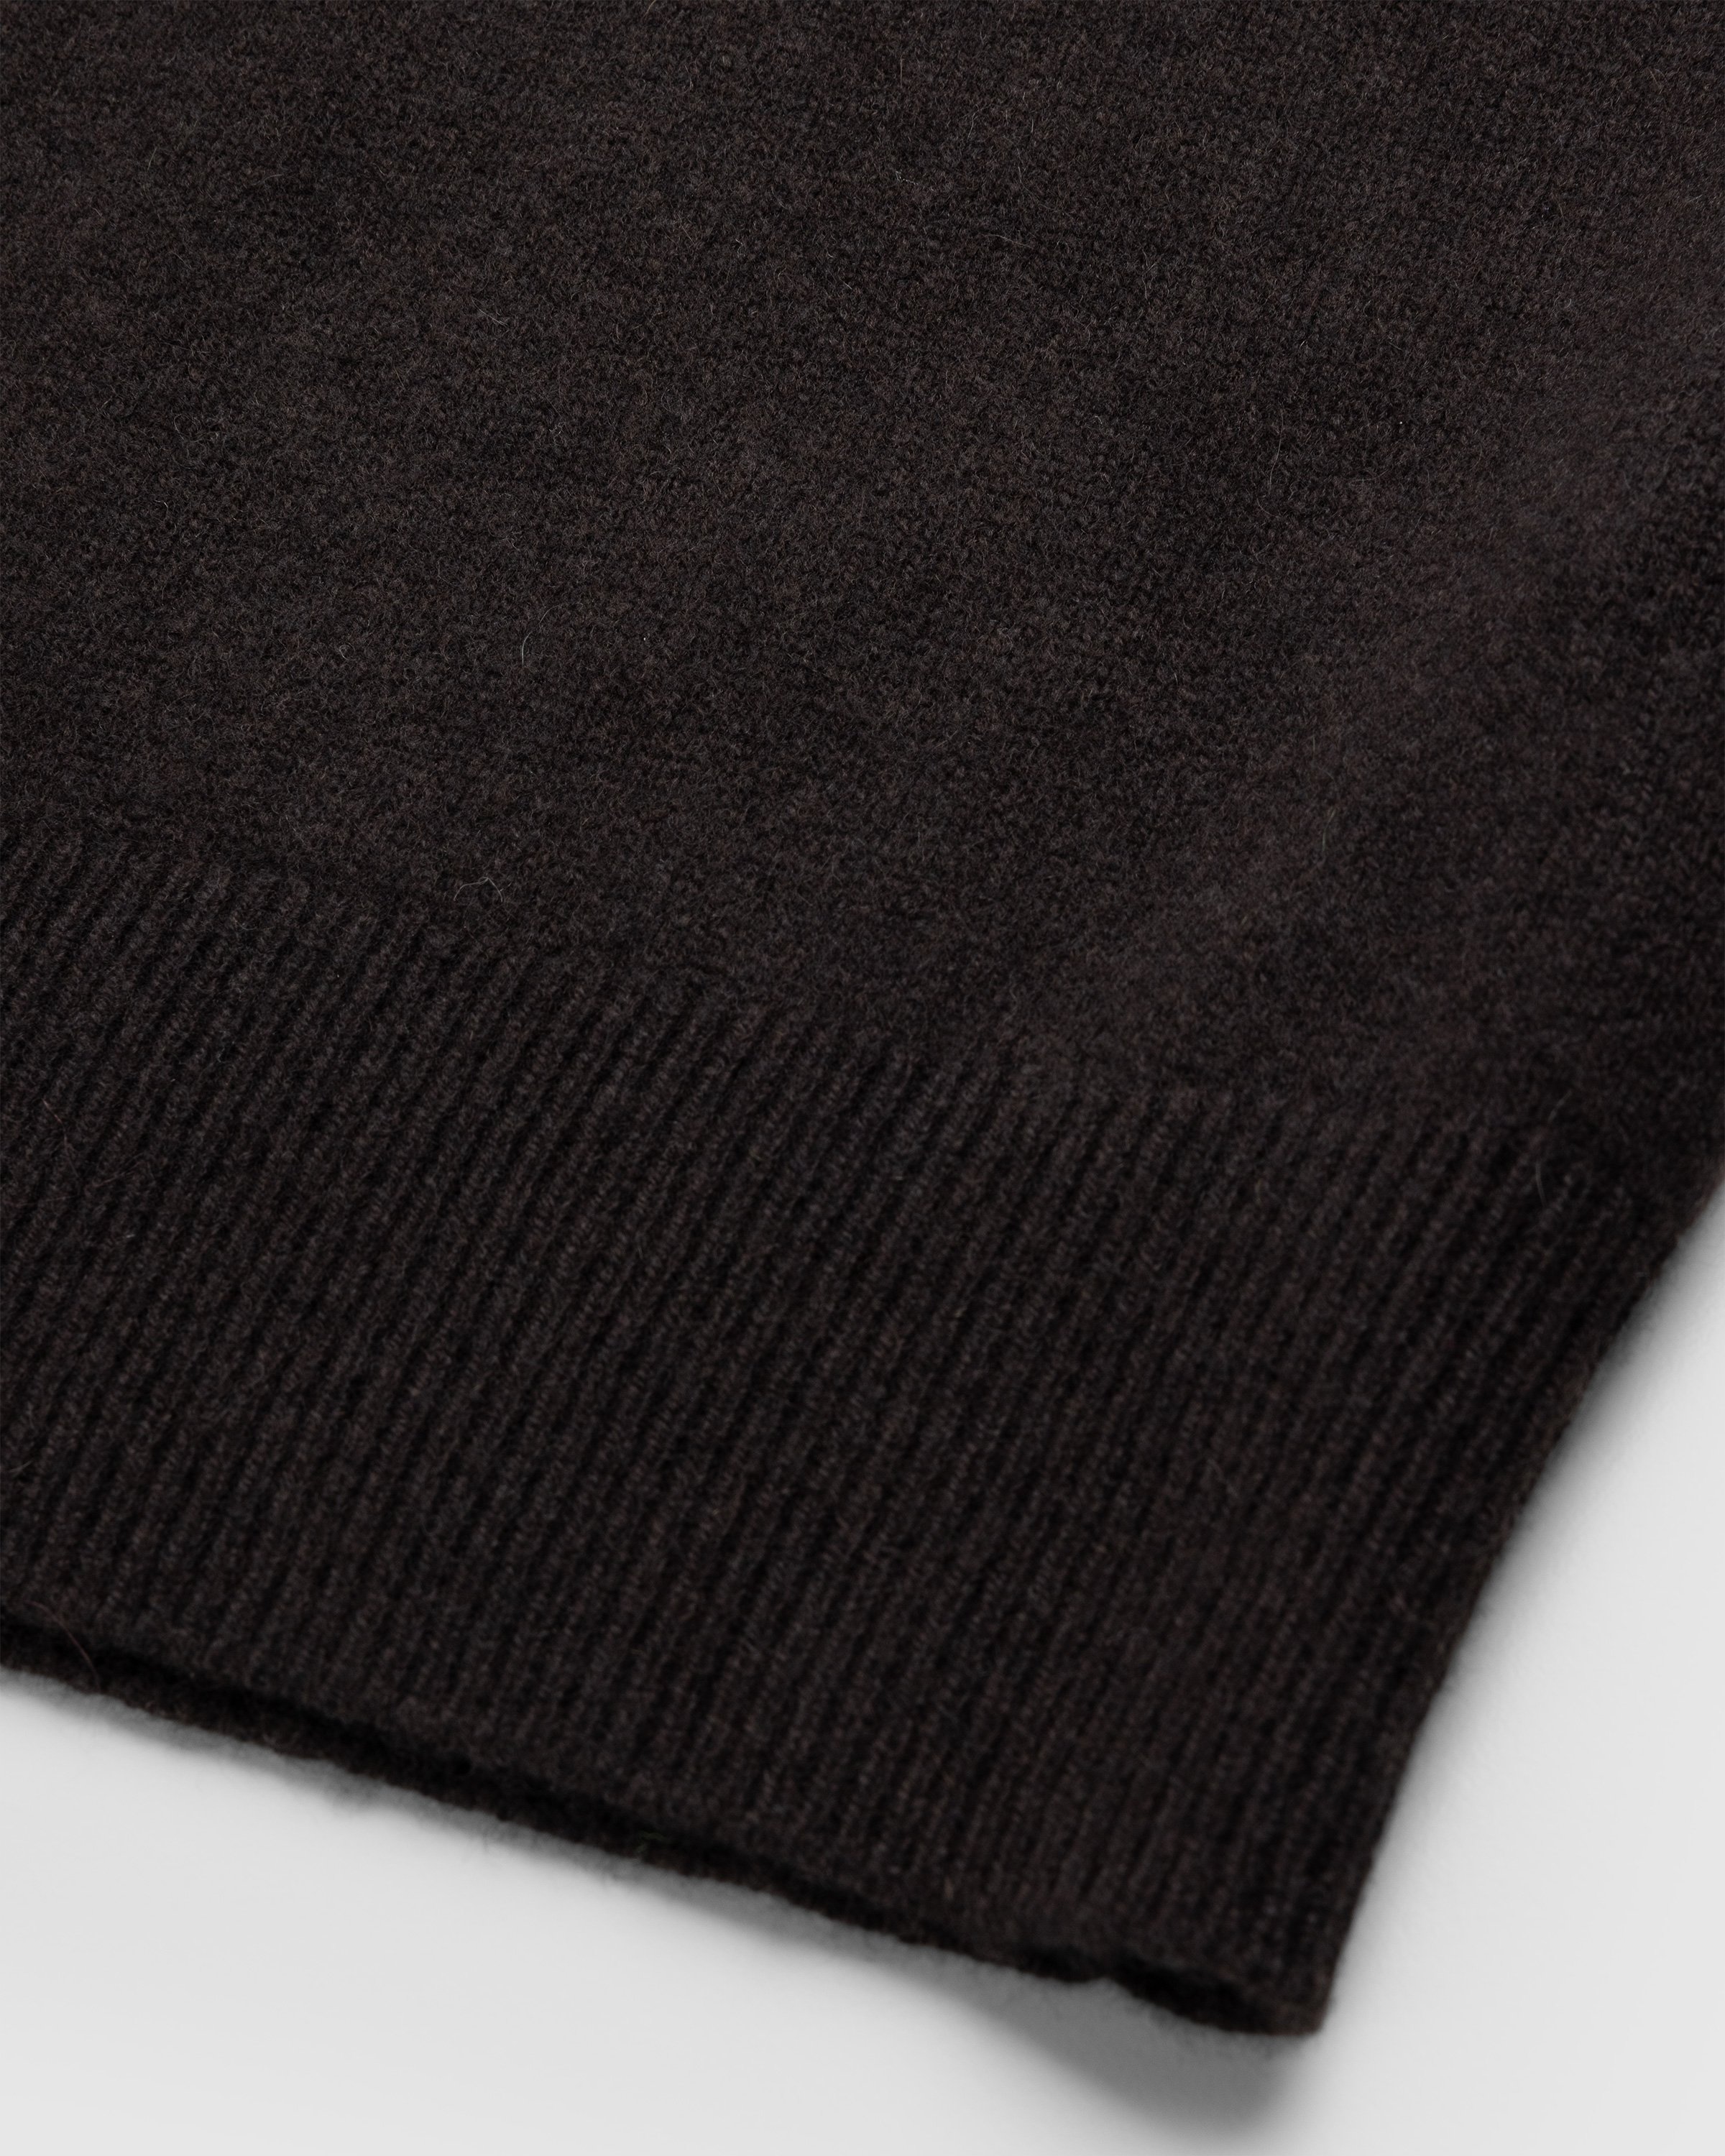 Acne Studios - Wool V-Neck Sweater Brown - Clothing - Brown - Image 6